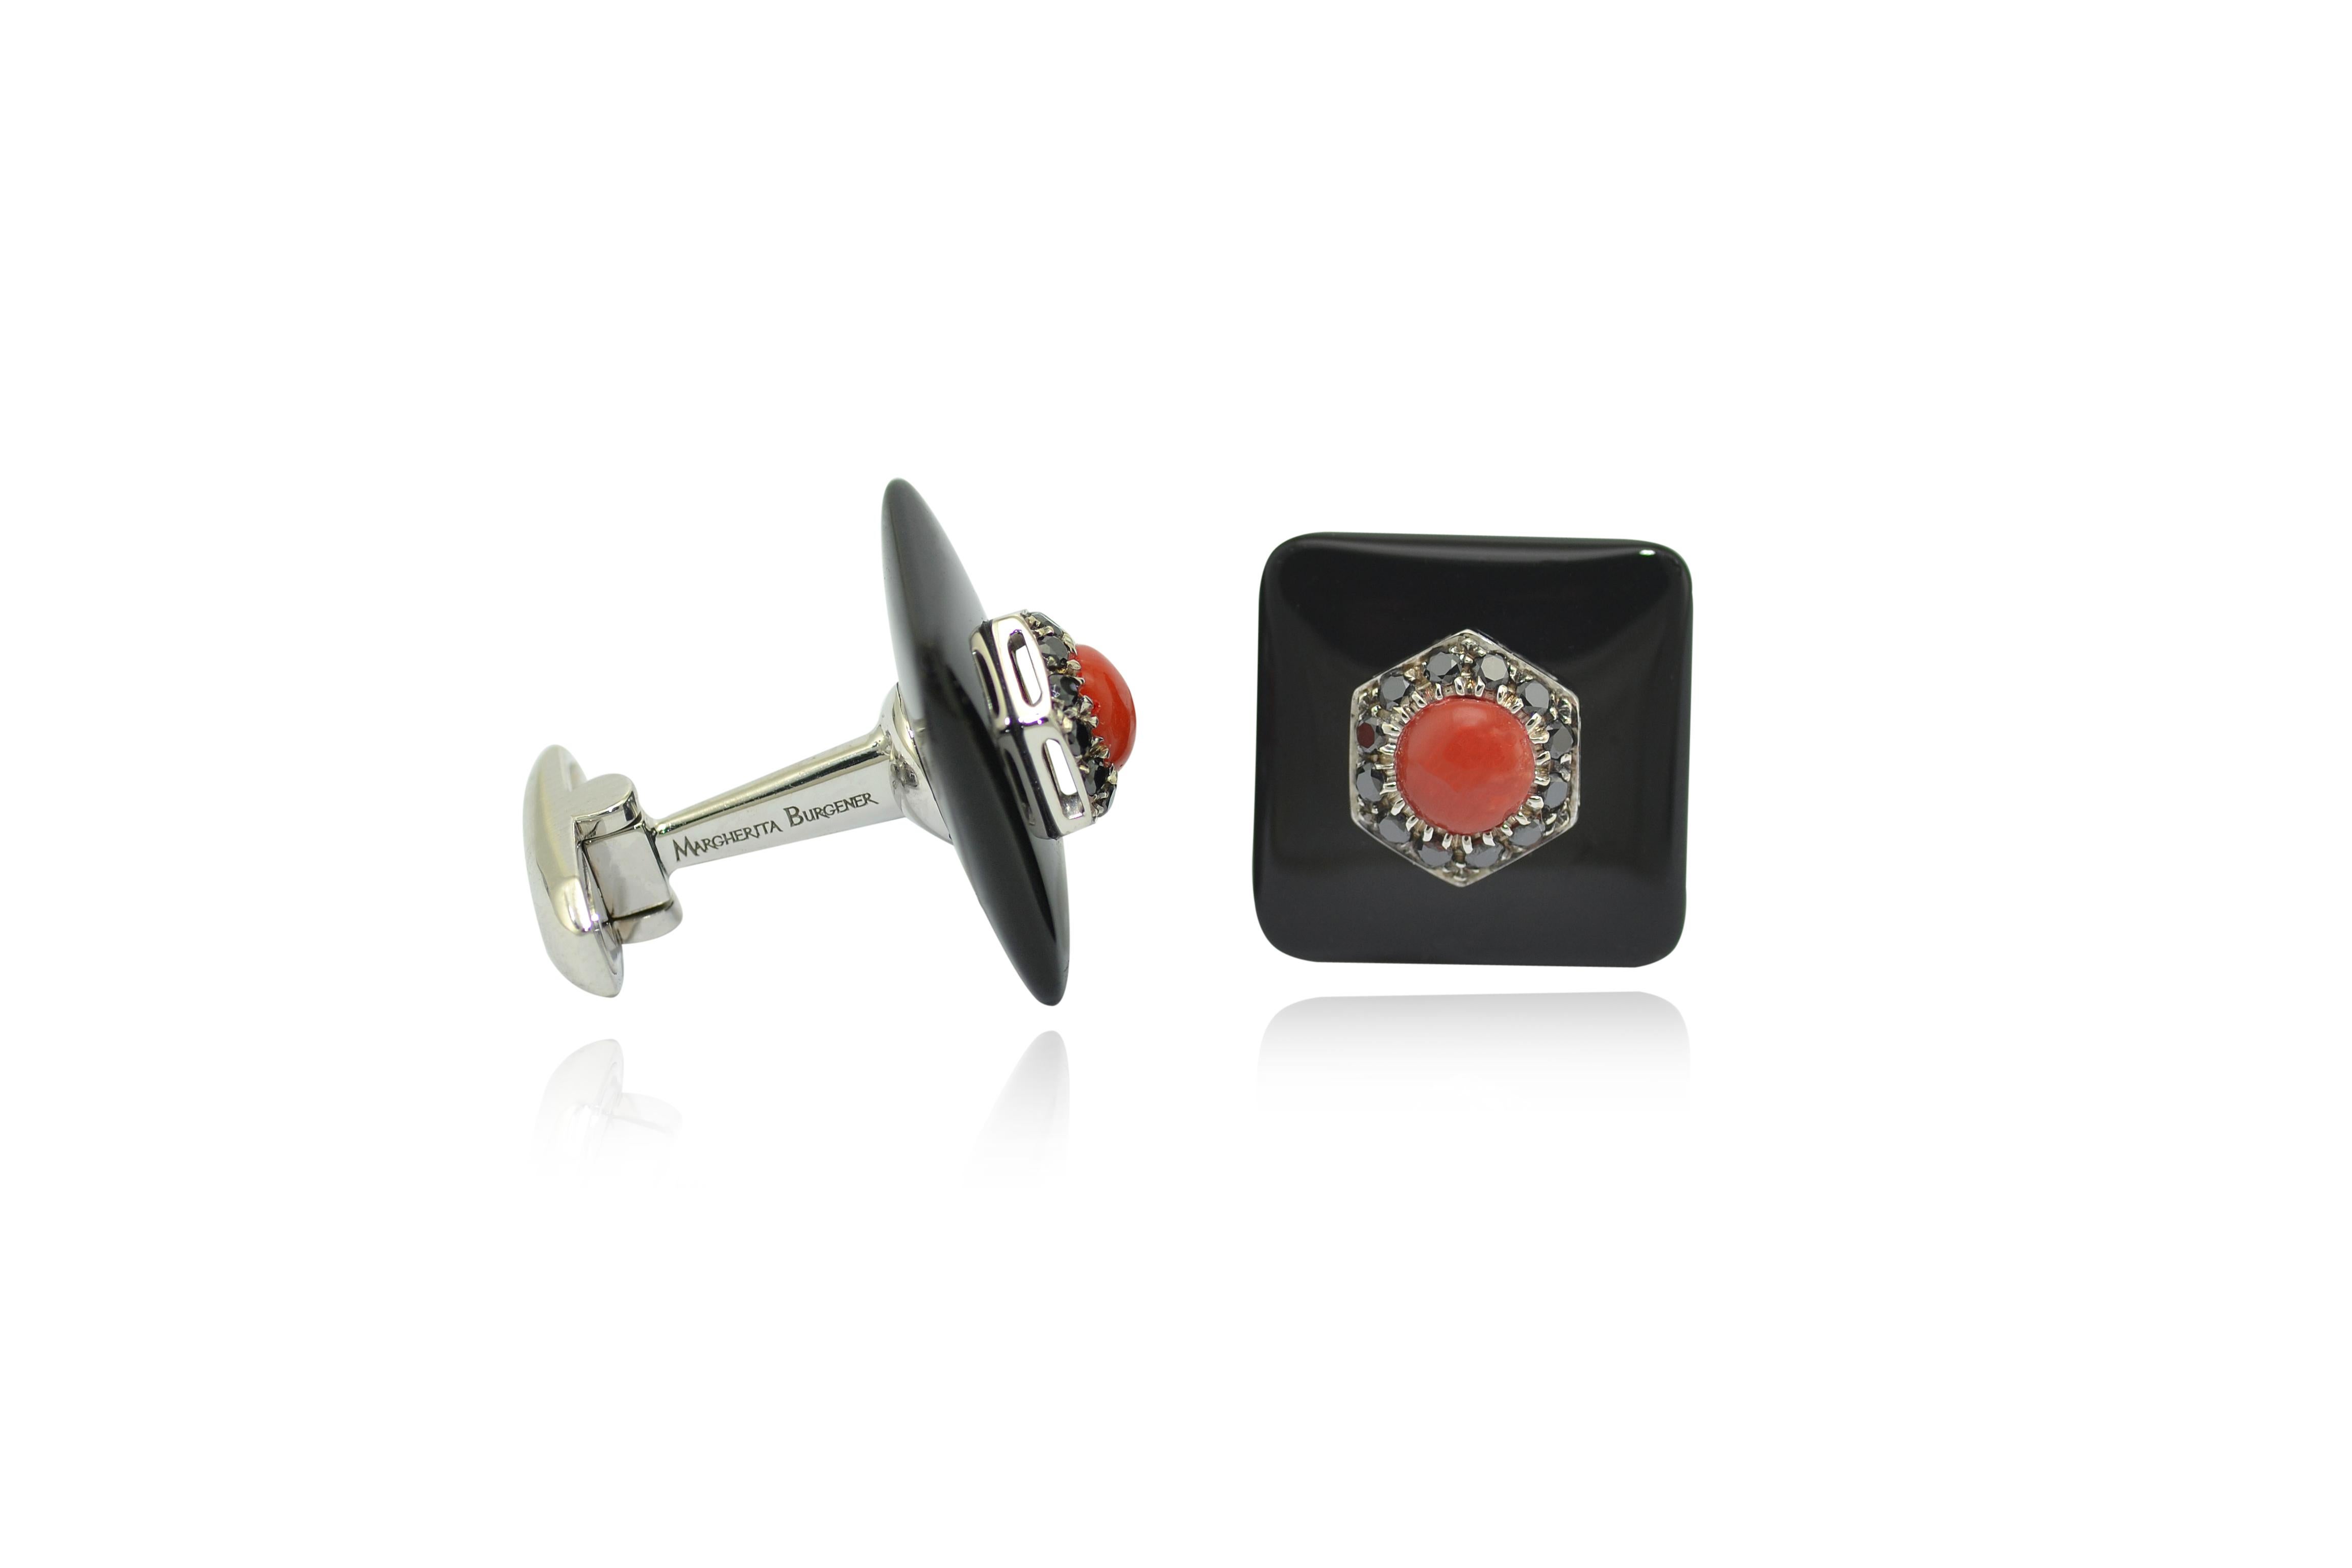 Handcrafted in Margherita Burgener factory, in Italy, the cufflinks are made in 18 Kt white gold.
the main motif is squared, bombè onyx, centering half ball of red ruburm coral surrounded by exagonal motif set in black diamonds.
Chic with that